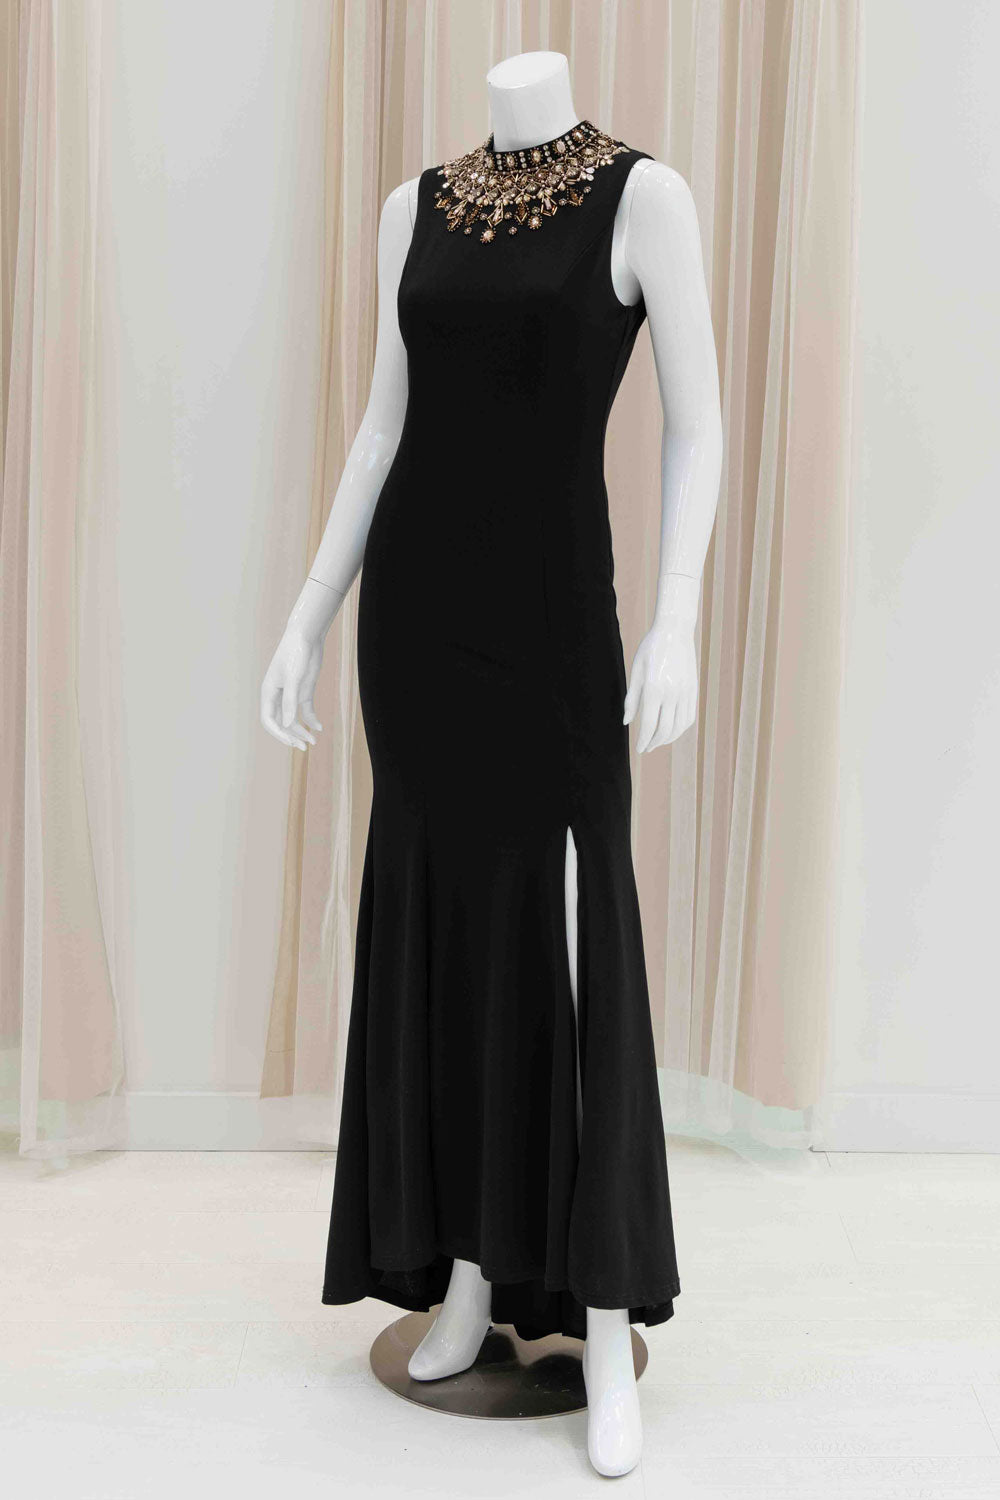 Form Fitting Evening Gown with Beaded Collar 